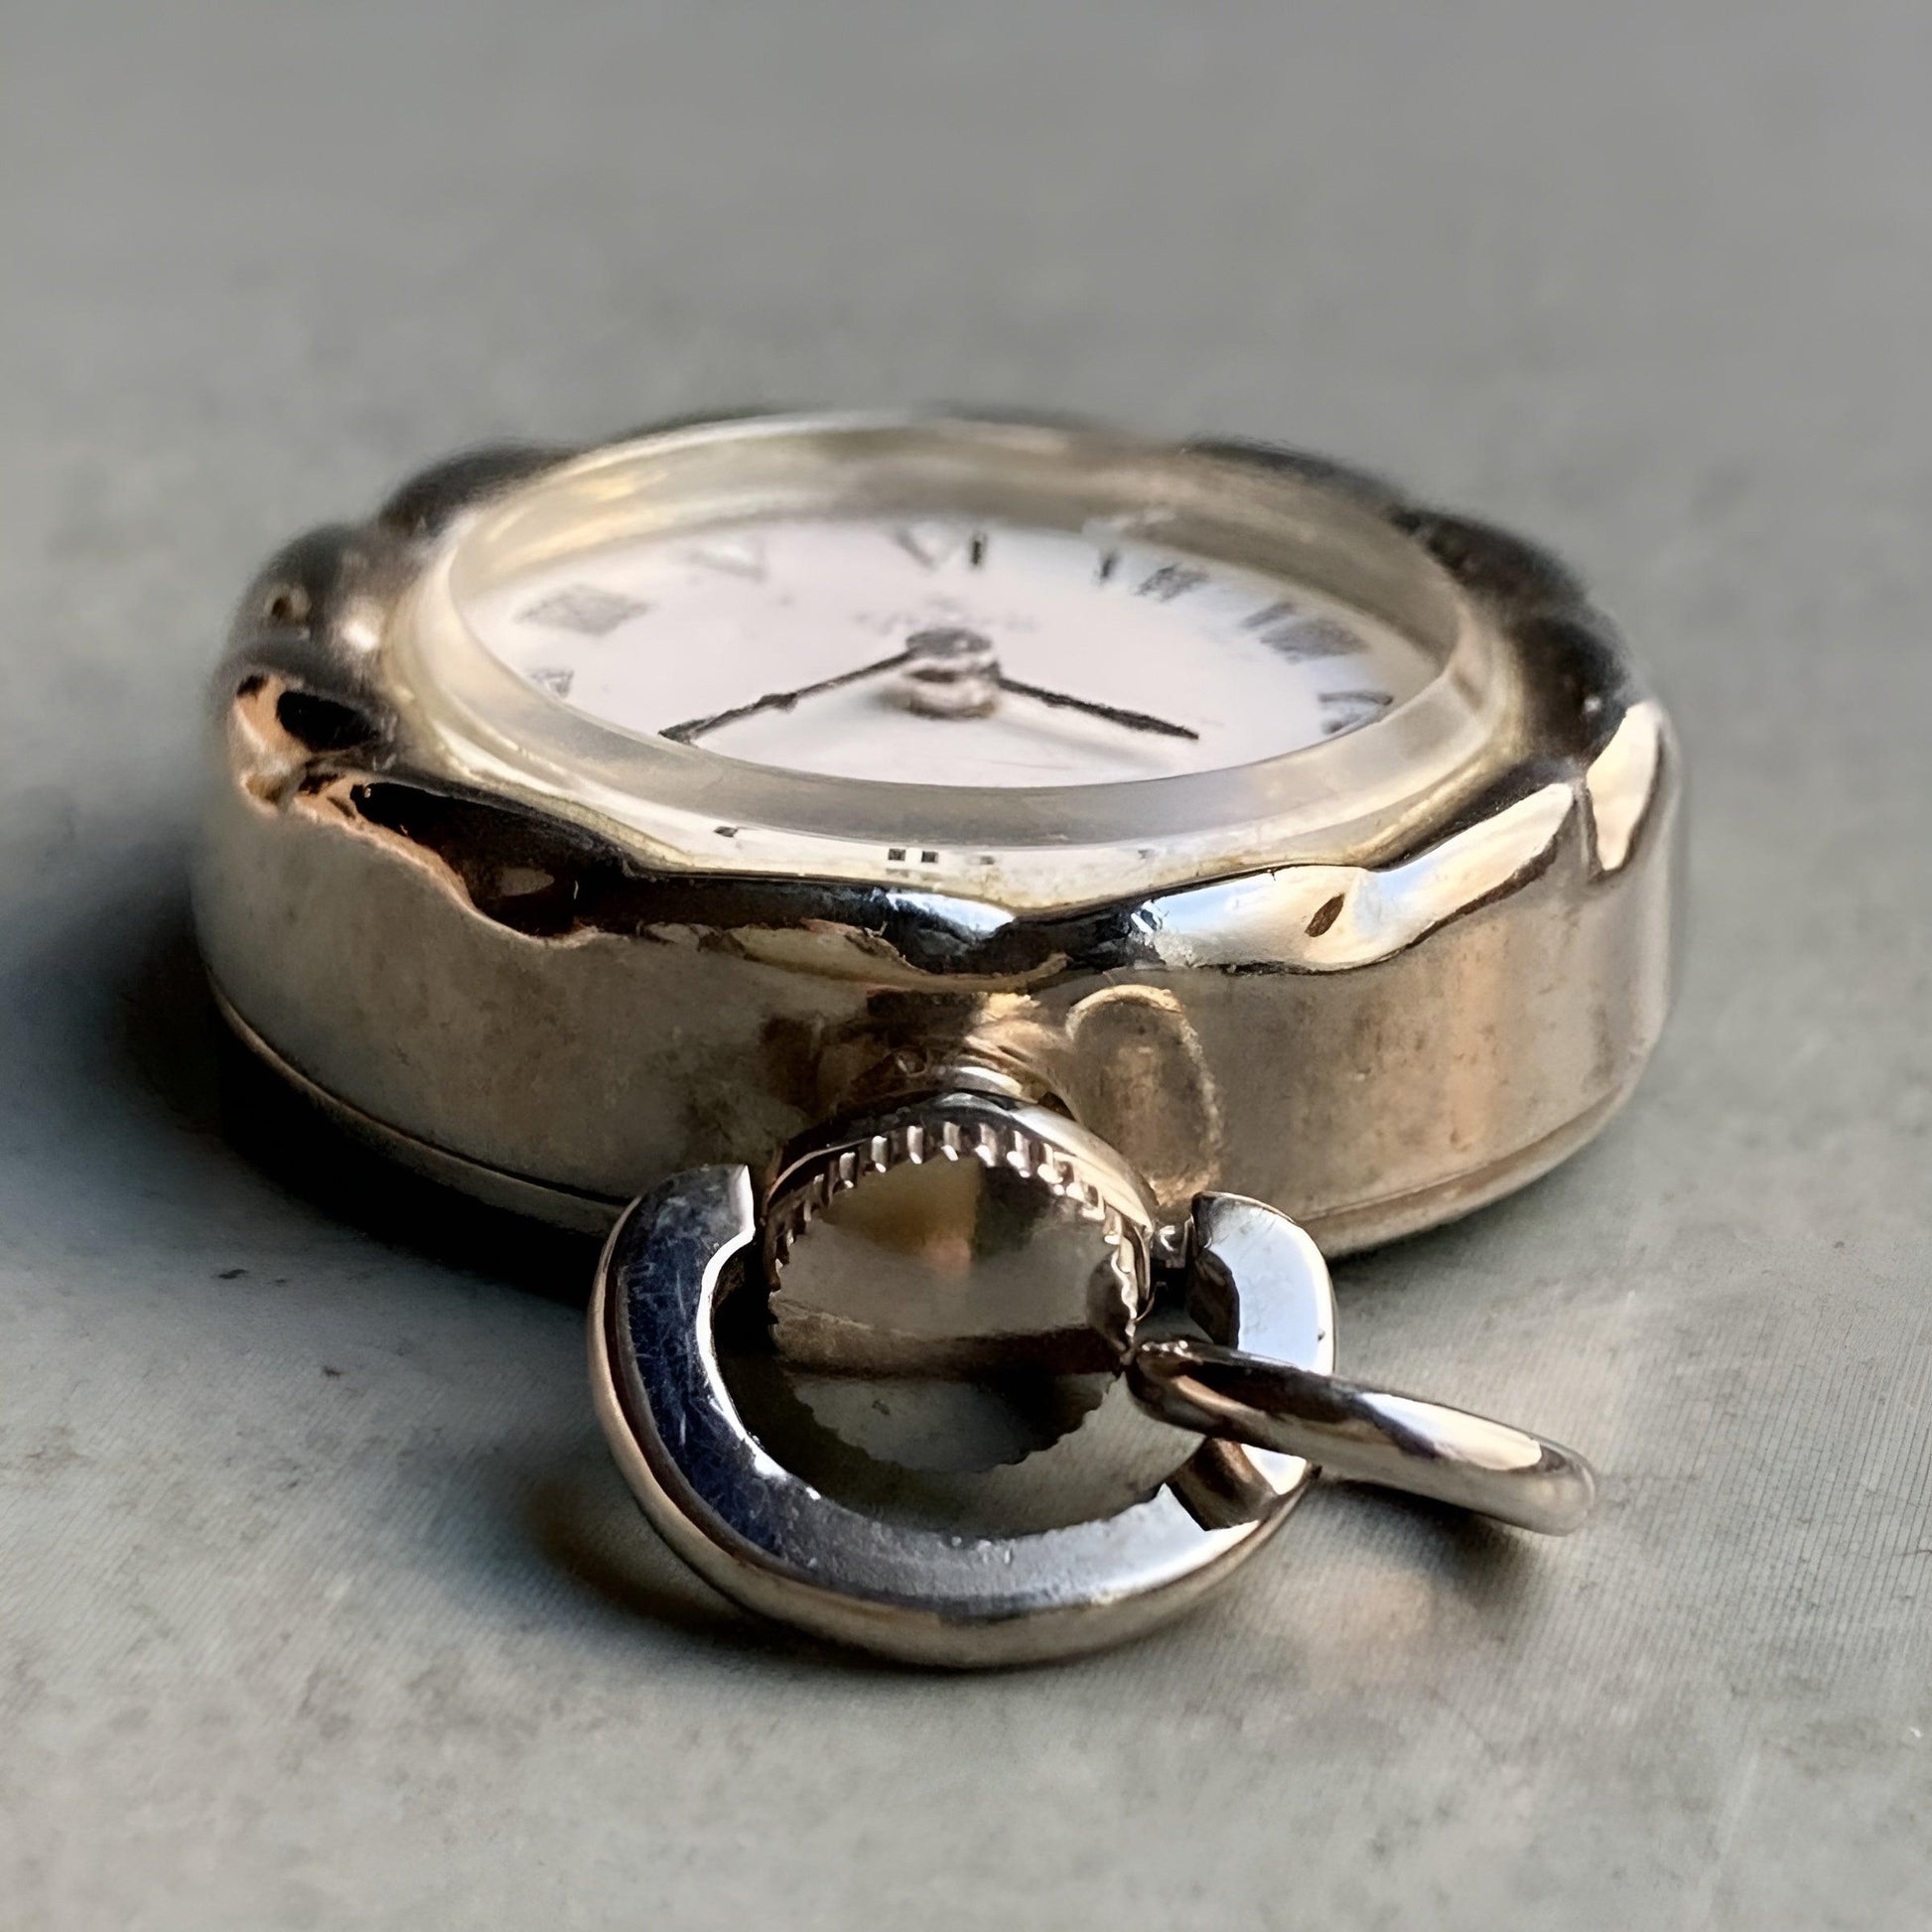 Seiko Pocket Antique Watch 1965 Manual Winding Vintage Pocket Watch Silver - Murphy Johnson Watches Co.